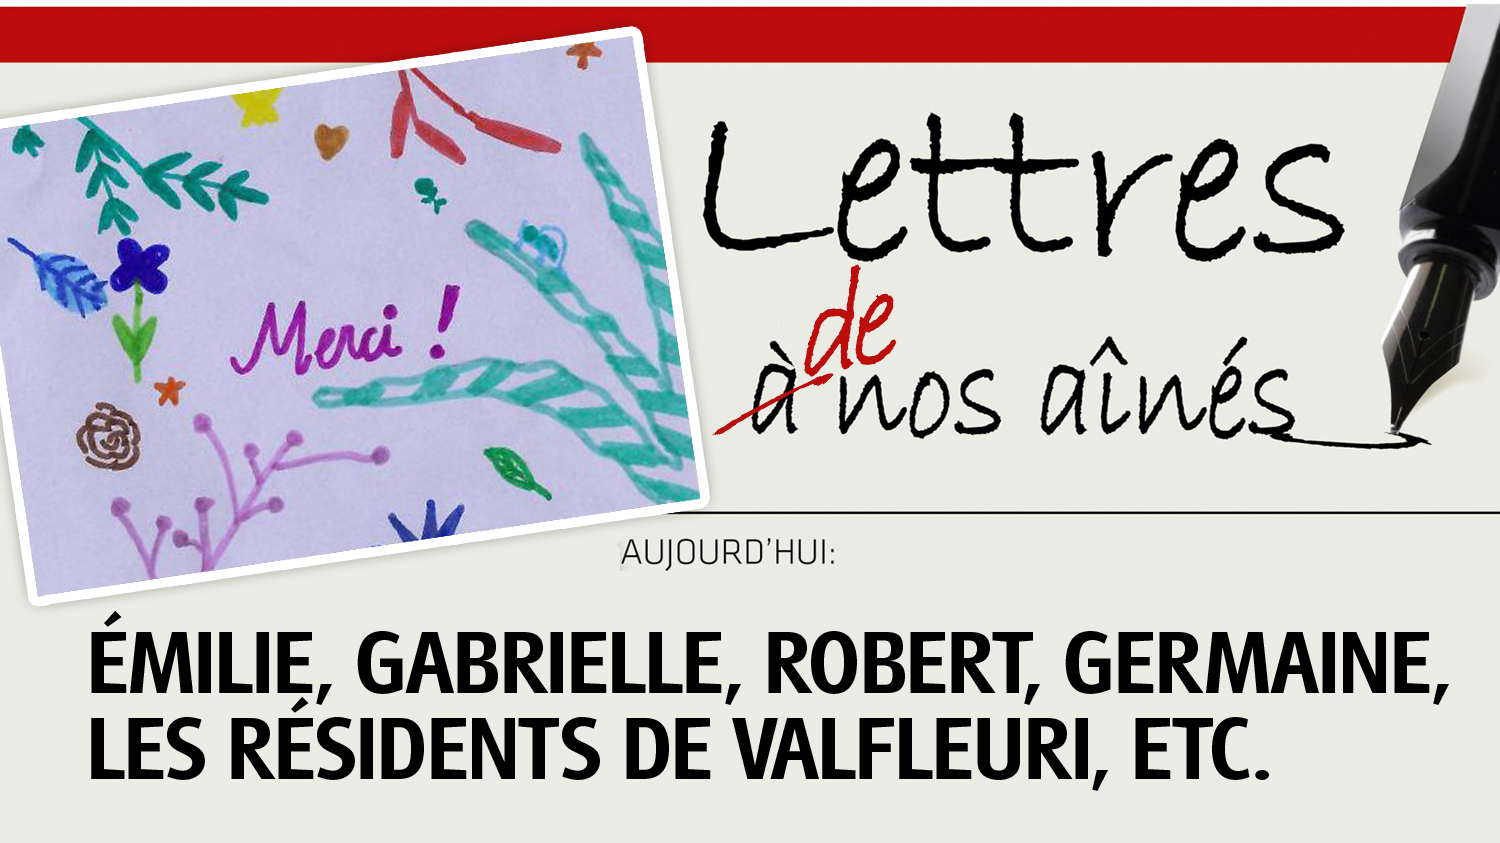 lettres-aines-HomeDivers